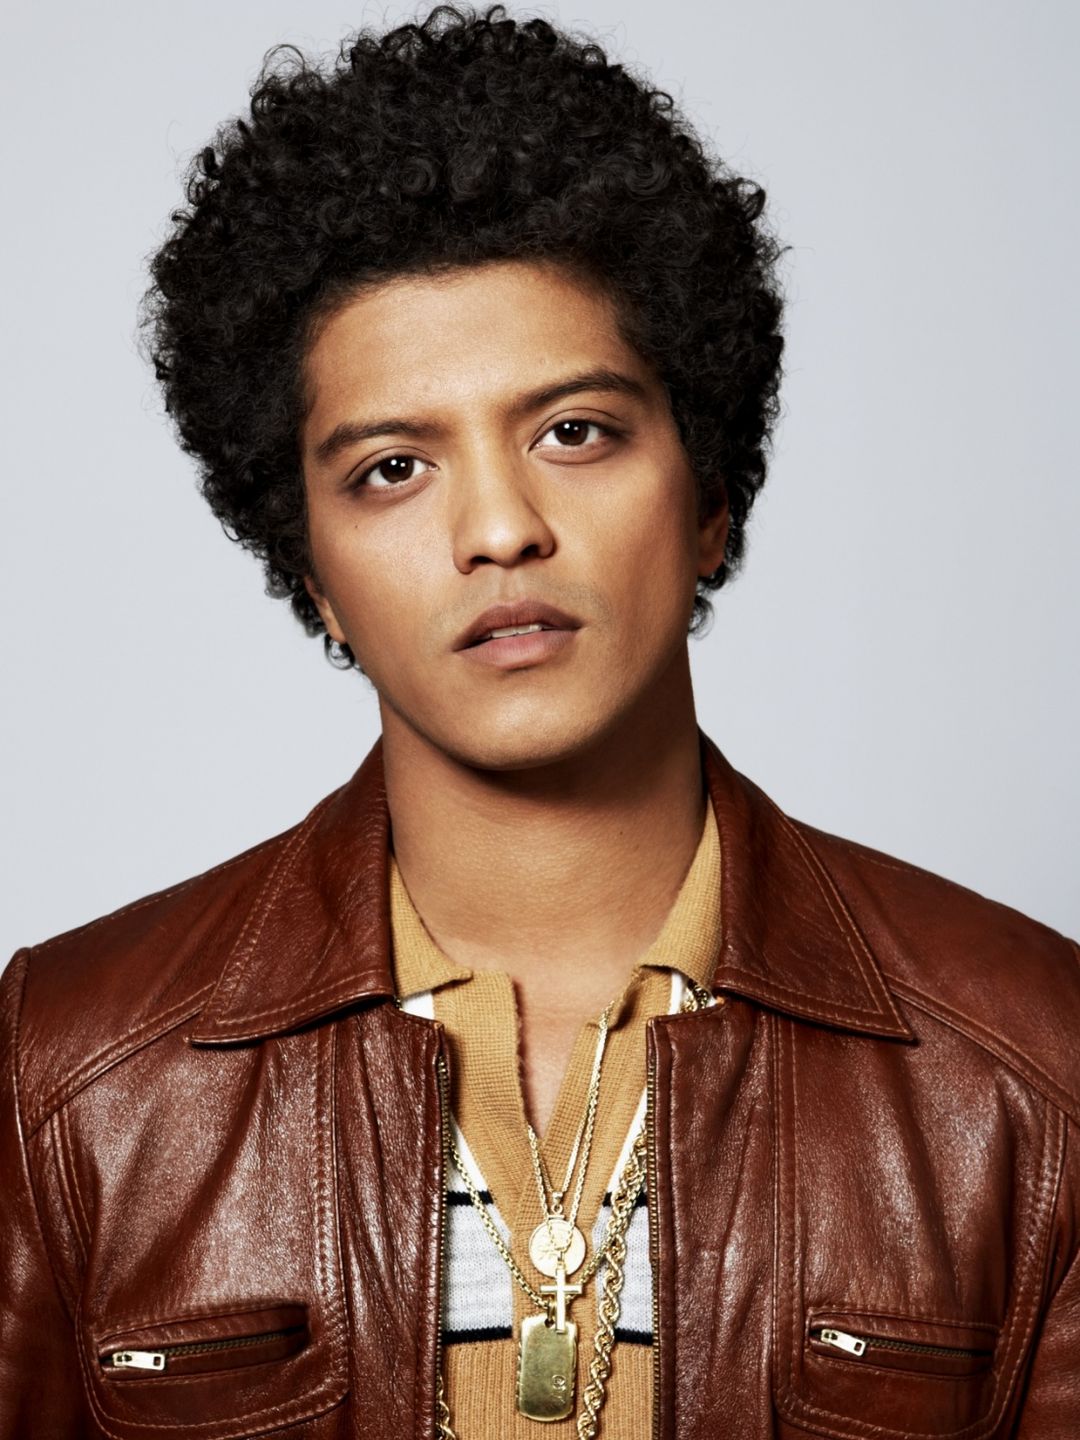 Bruno Mars does he have kids